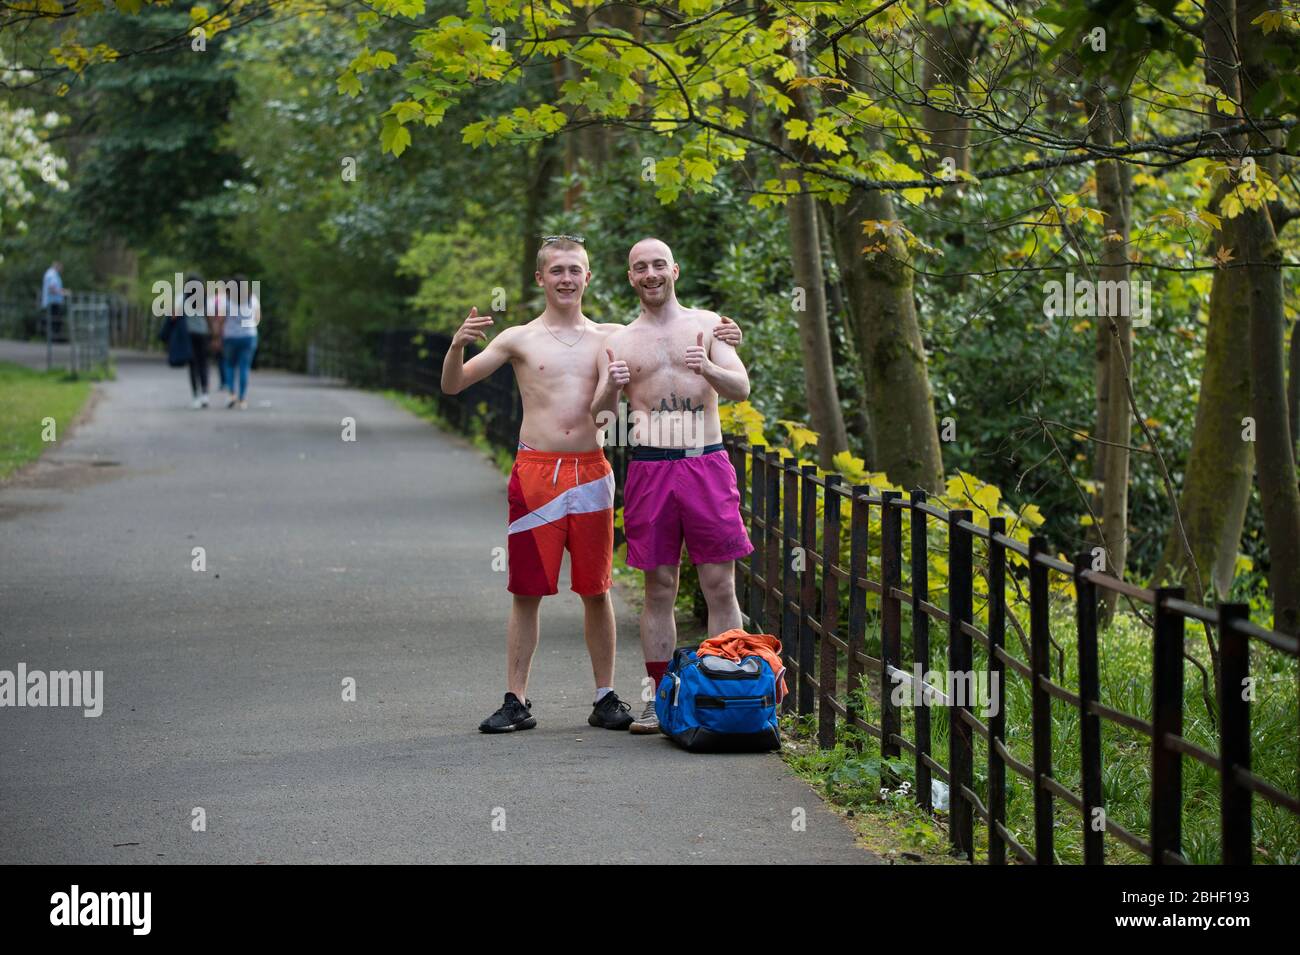 Glasgow, UK. 25th Apr, 2020. Pictured: (left-right) Keiran Macginley & Keir Fox, enjoying the sunshine in the park. As the saying goes in Glasgow if the sun is out it's “taps aff” weather. Scenes from the first weekend of the extended lockdown from KelvinGrove Park in Glasgow's West End during a very hot and sunny Saturday. Credit: Colin Fisher/Alamy Live News Stock Photo